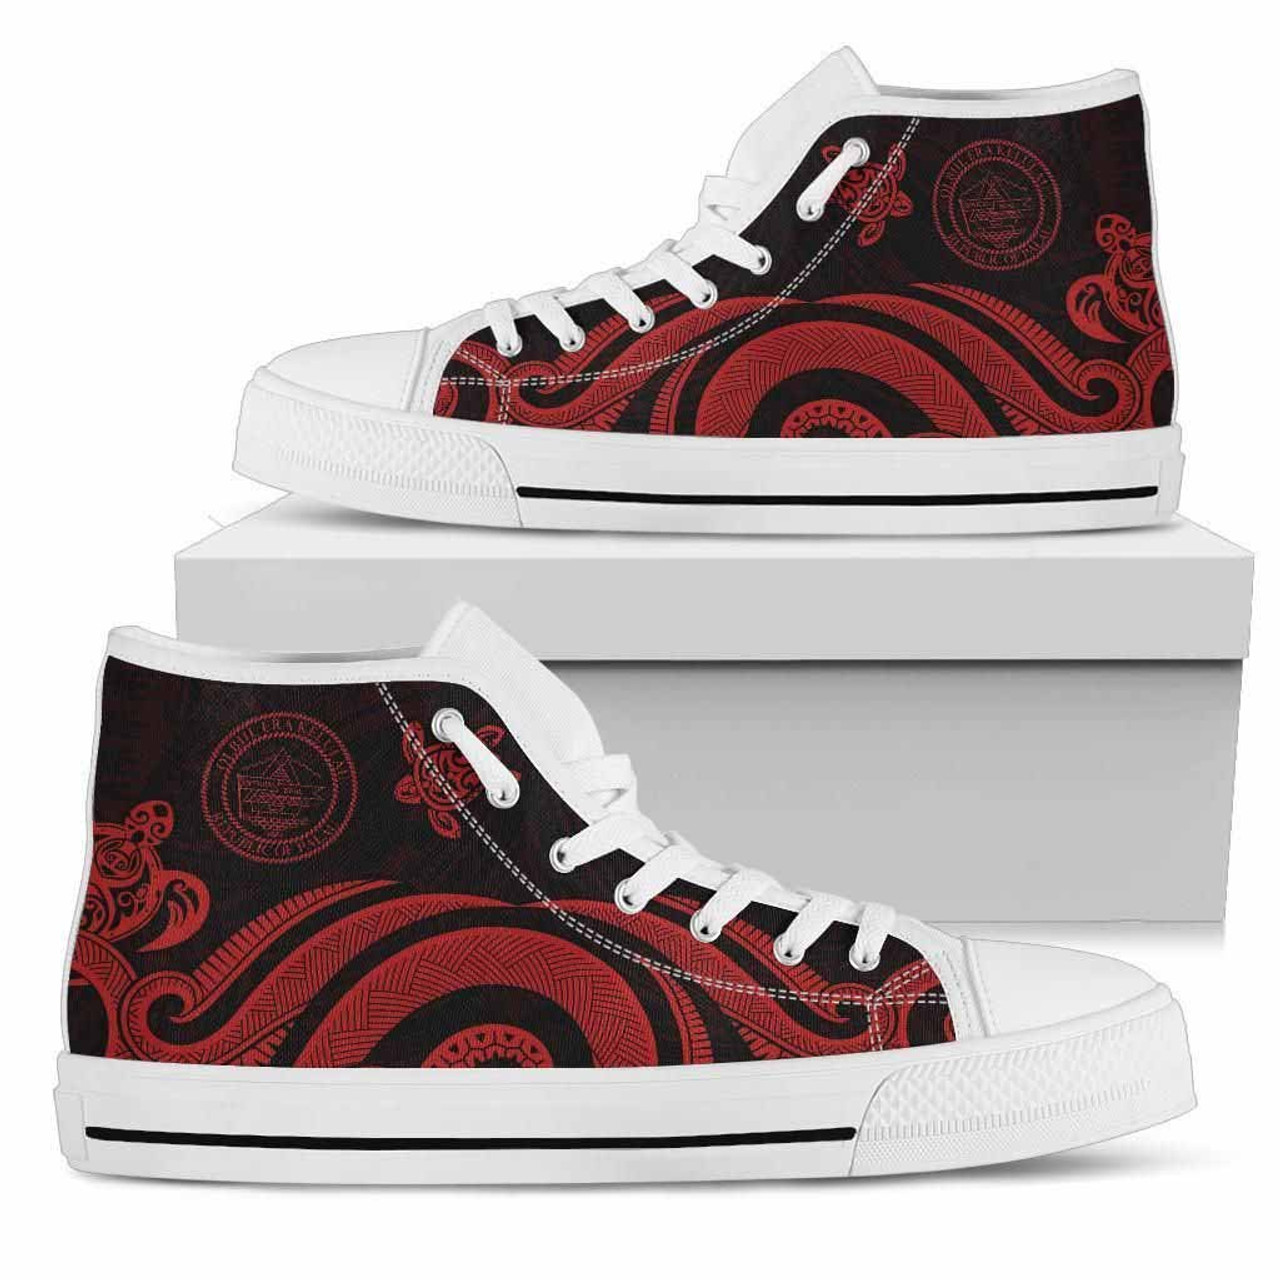 Palau High Top Canvas Shoes - Red Tentacle Turtle 6